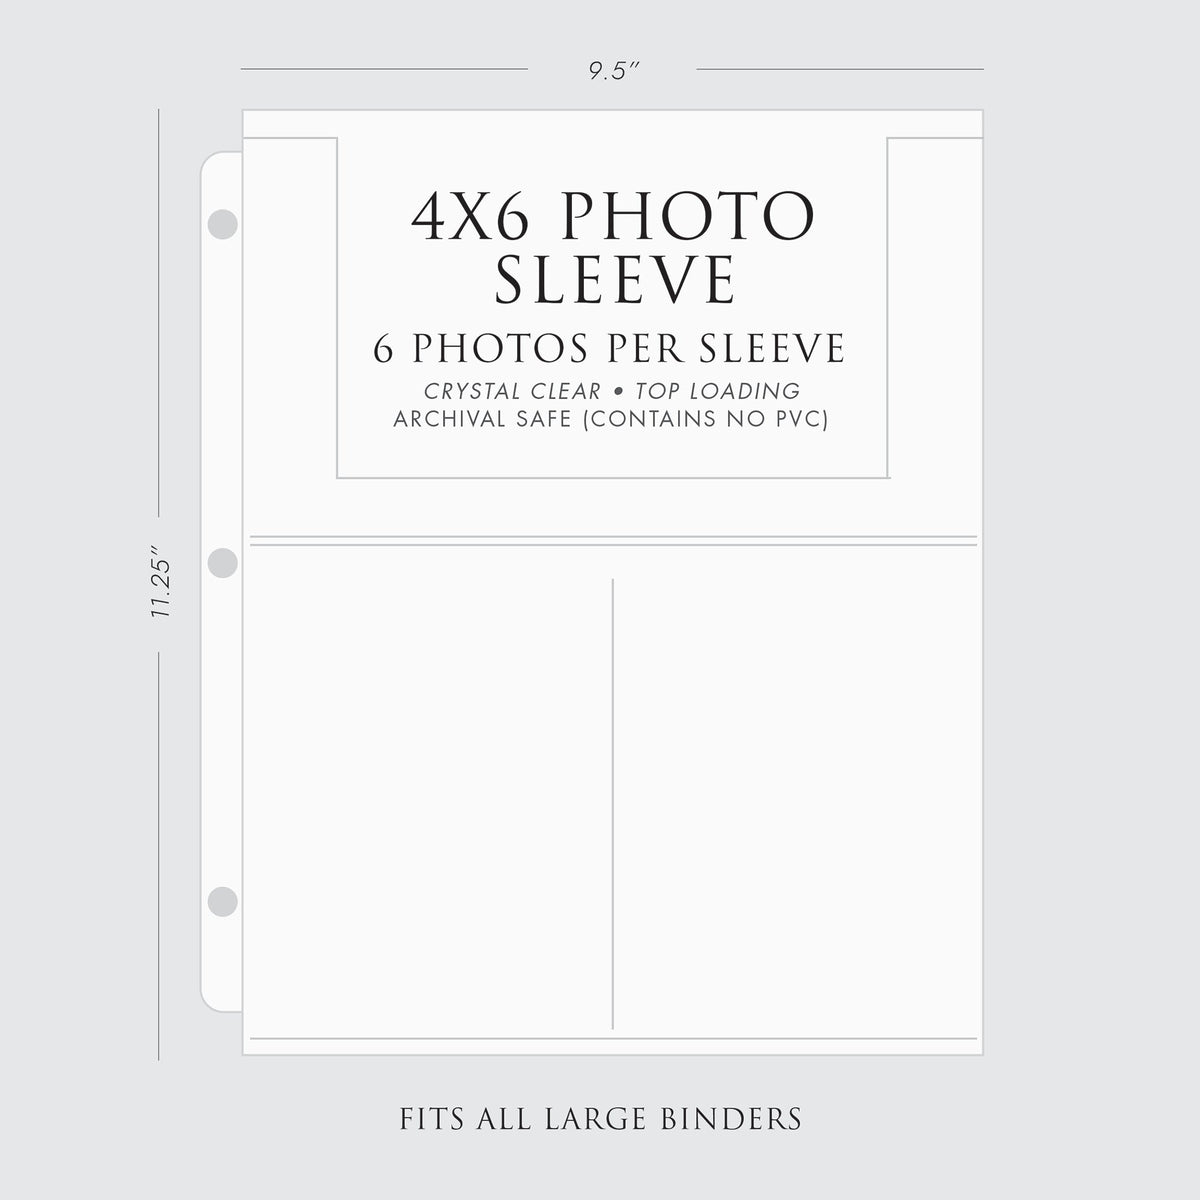 Large Photo Binder (for 4x6 photos) with Celery Cotton Cover